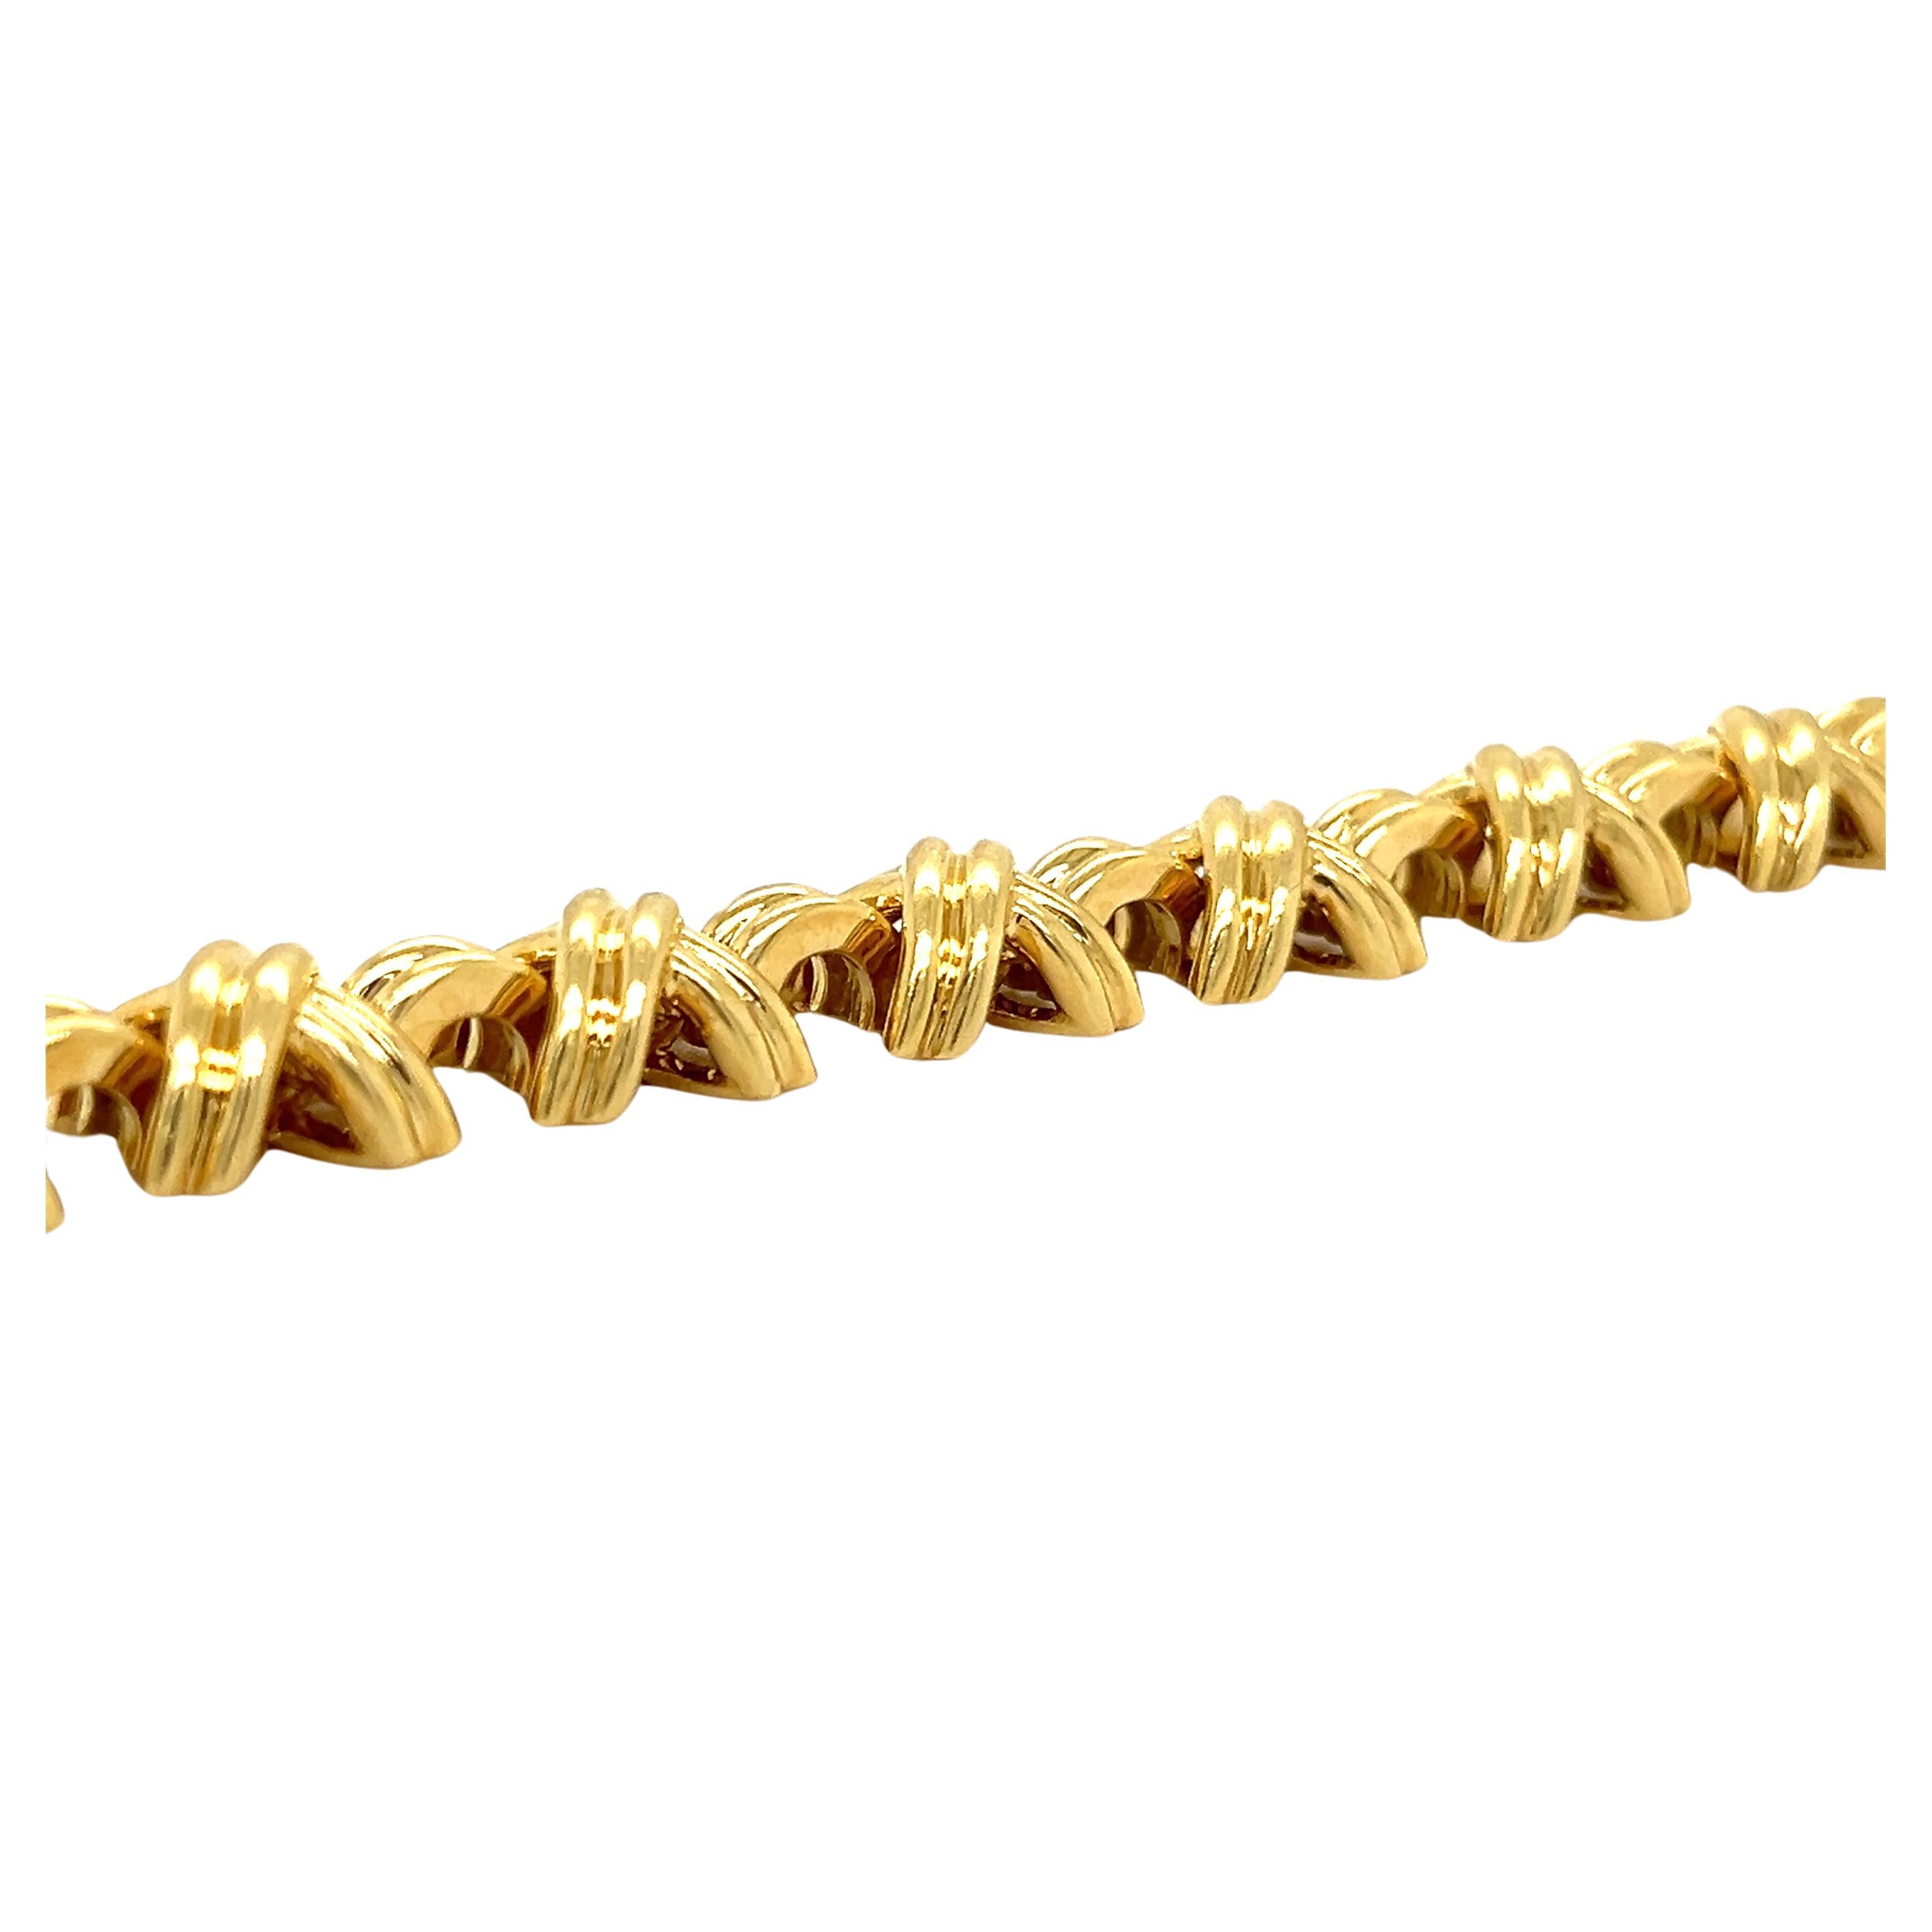 Beautiful bracelet by famed designer Tiffany & Co. the bracelet is crafted in solid 18k yellow gold and is from the X collection. 
   The bracelet shows a 10.75 mm width and weighs 50.8 grams. The bracelet measures 7.5